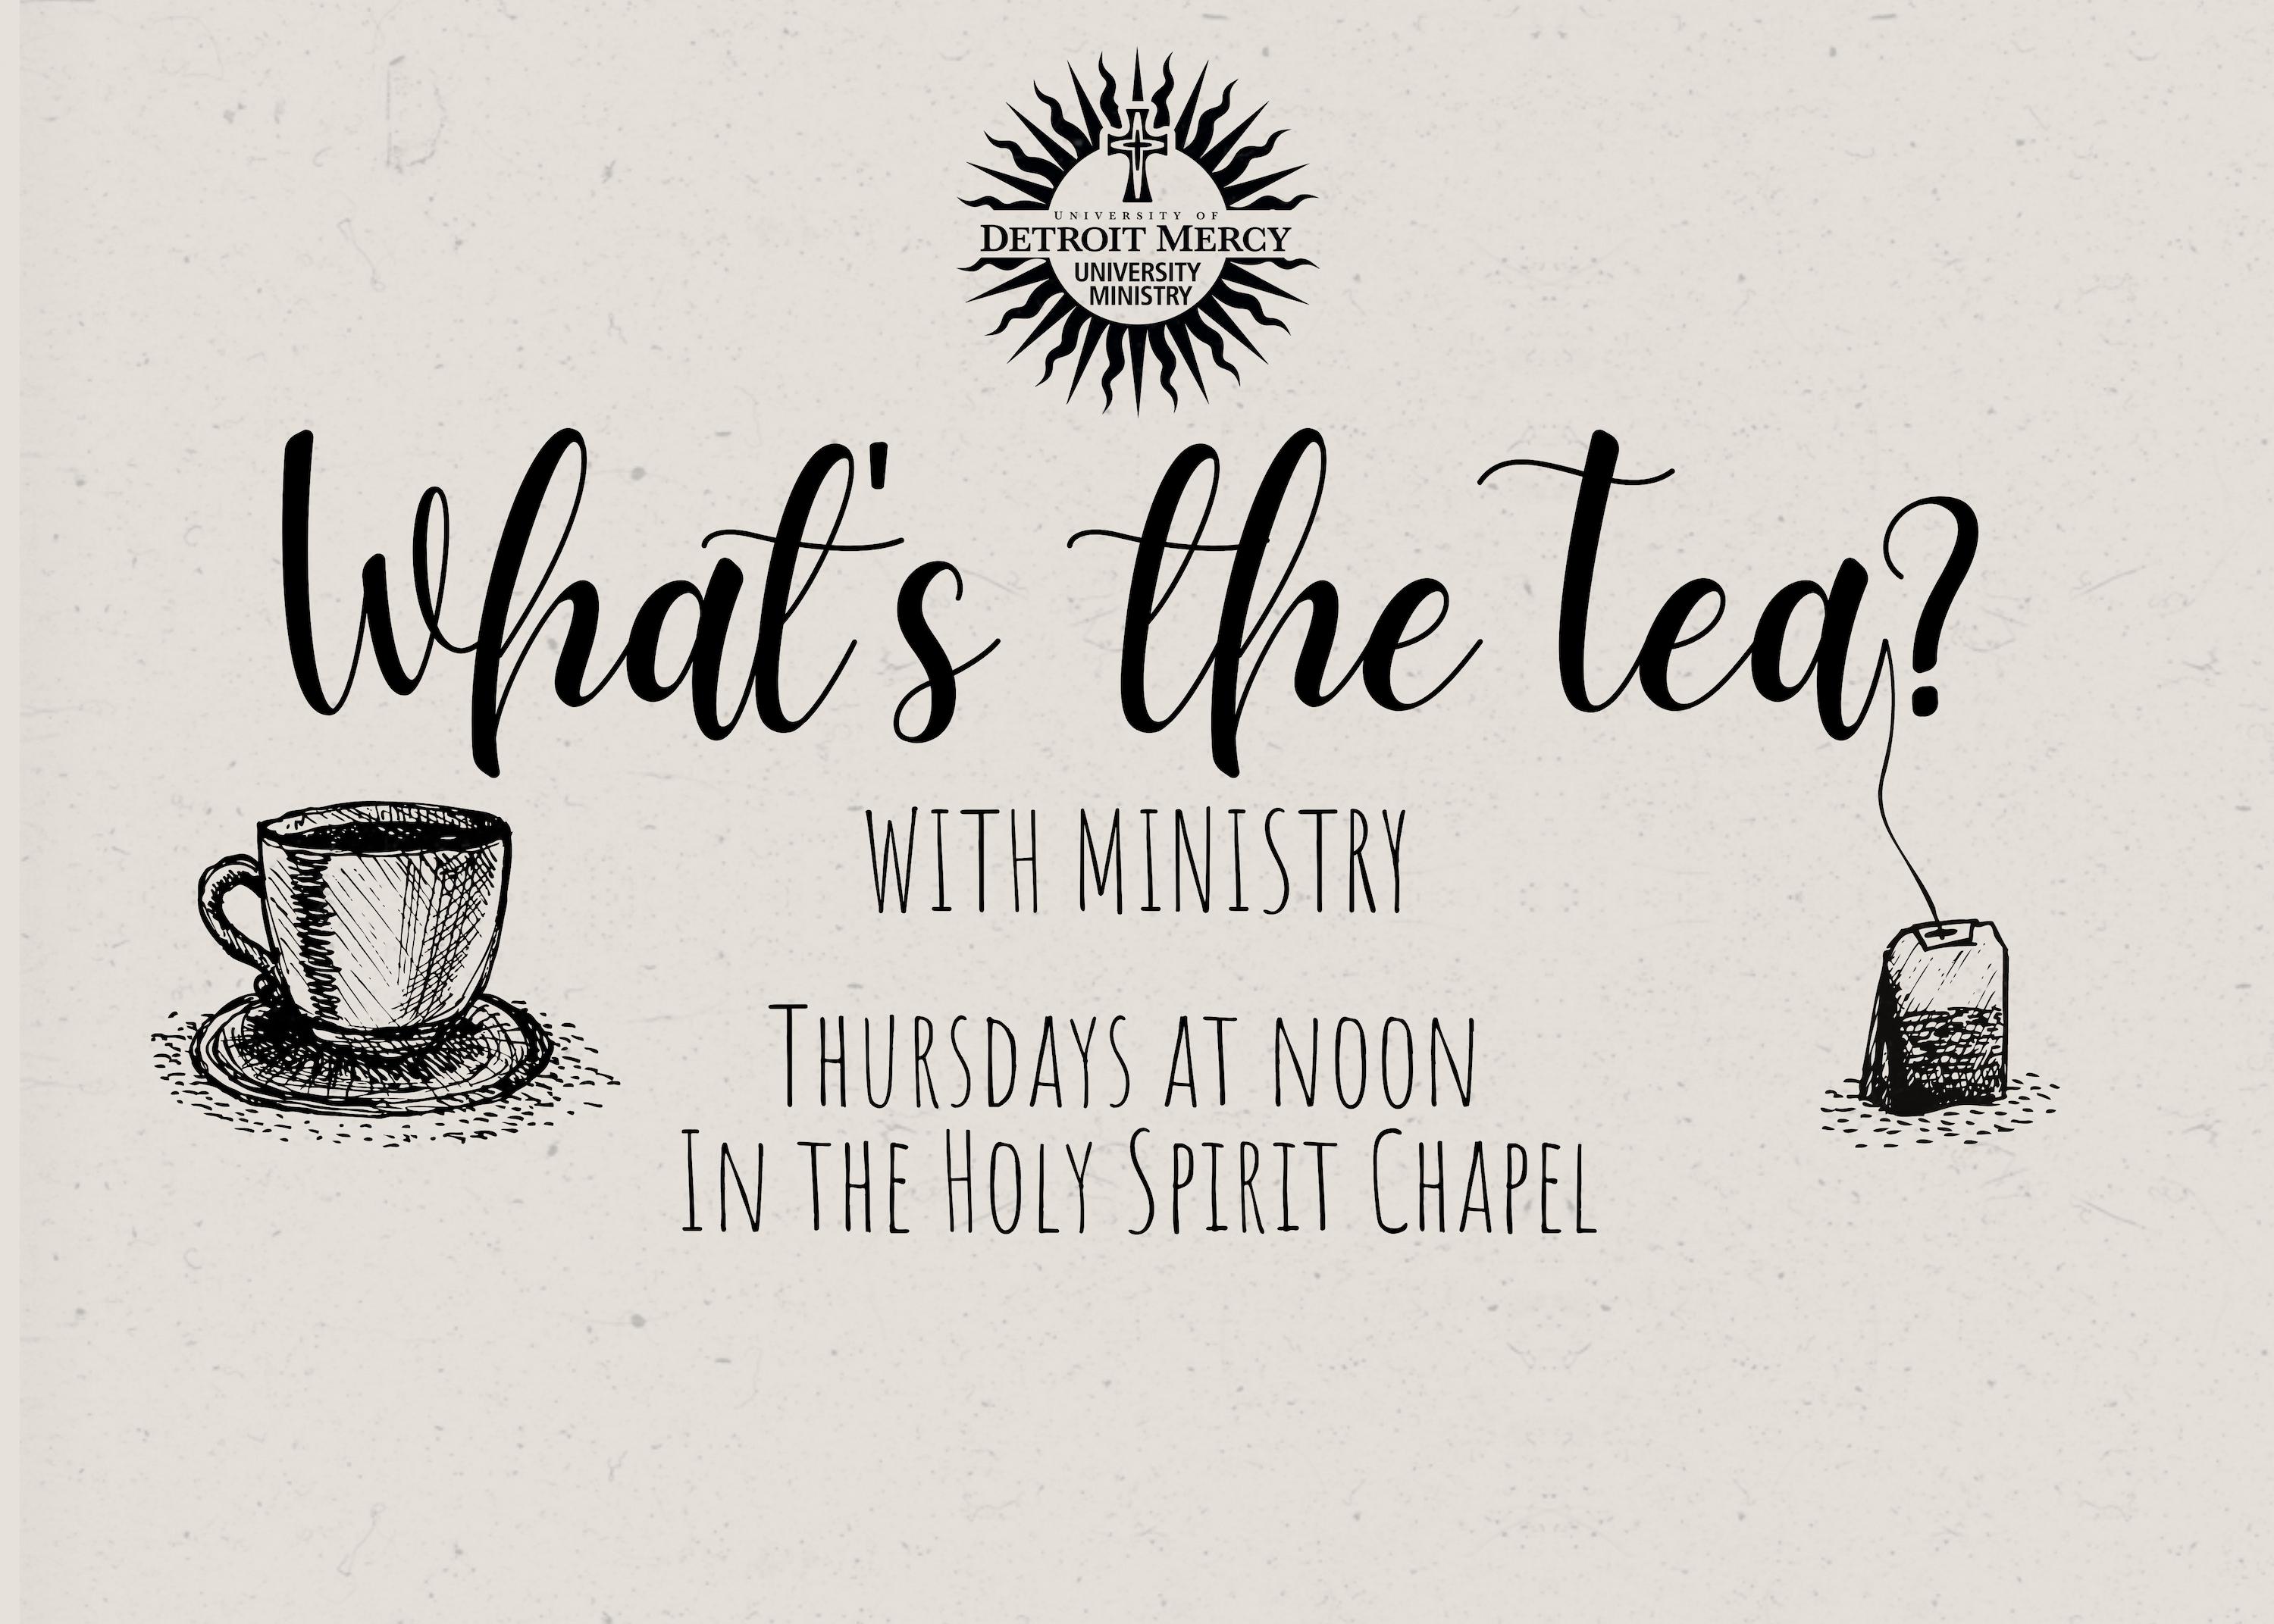 Flyer with a tea cup and Ministry logo